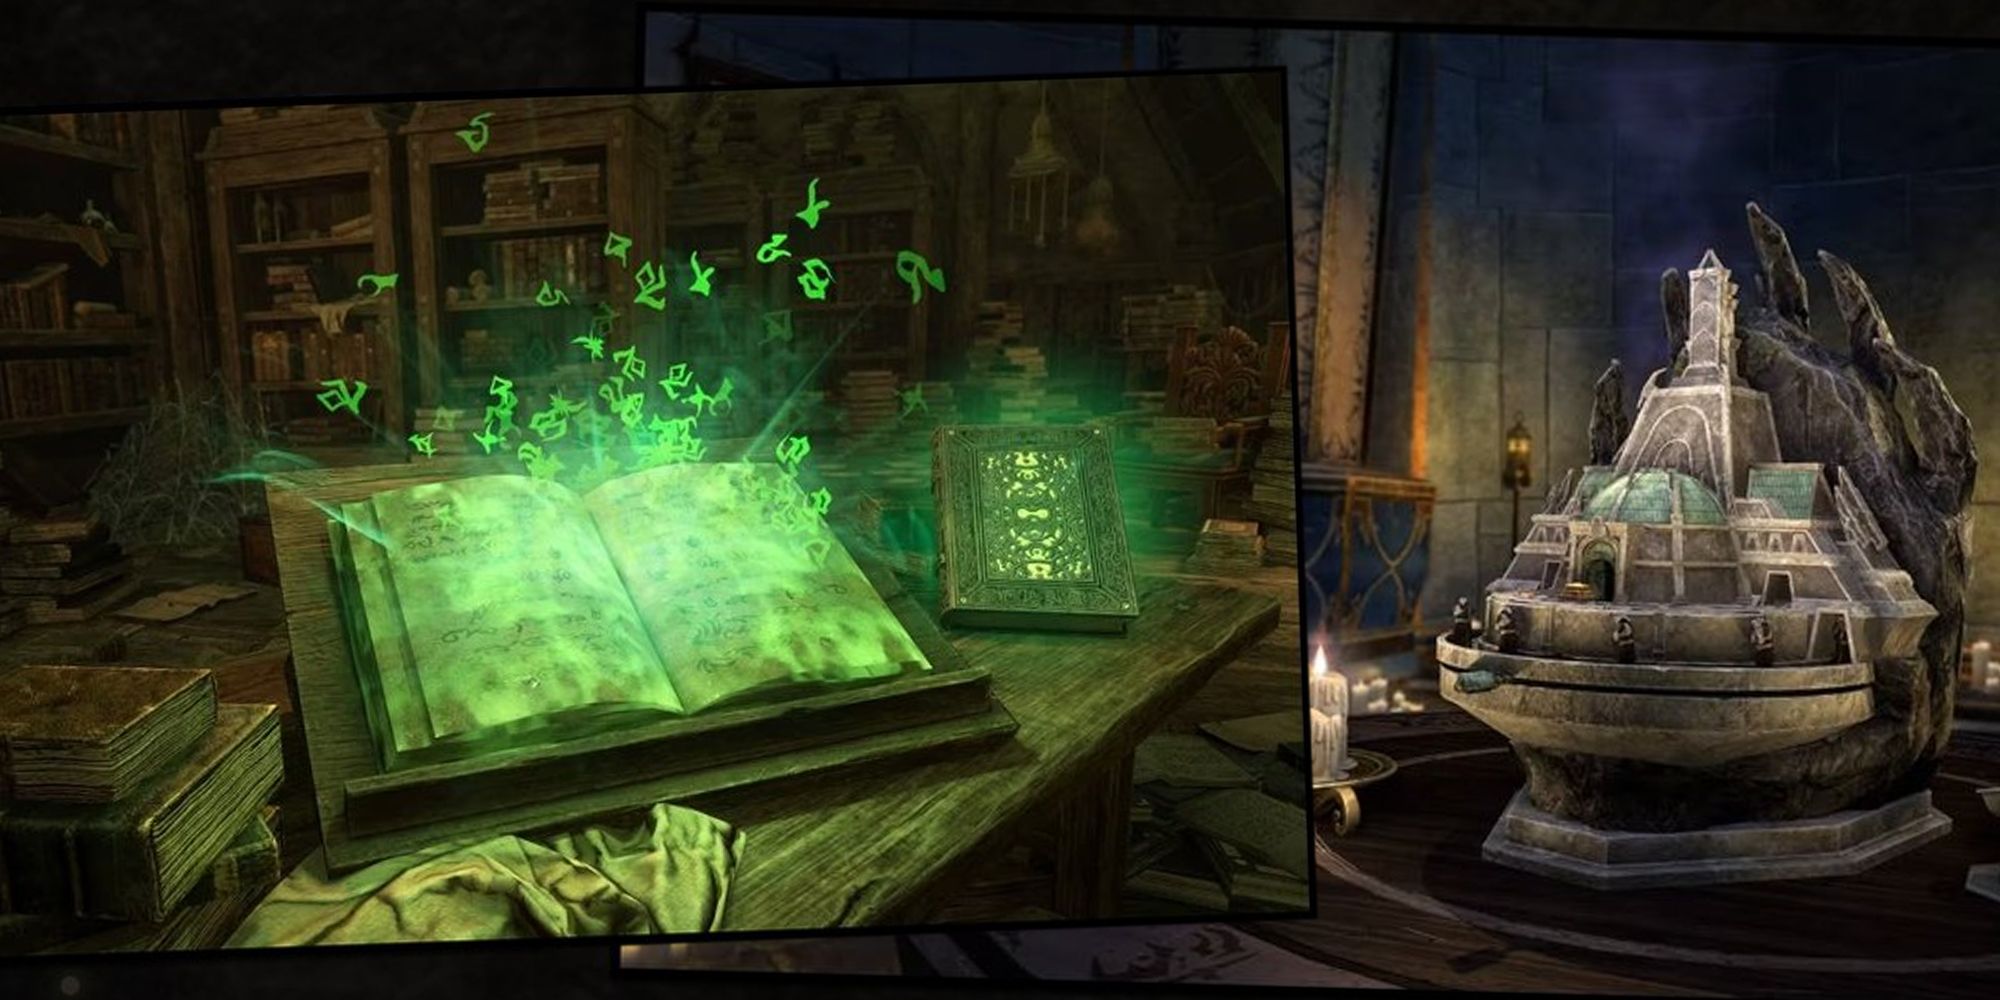 Elder Scrolls Online Hermaeus Mora green runes coming out of a book next to a music box shaped like a Dunmer city